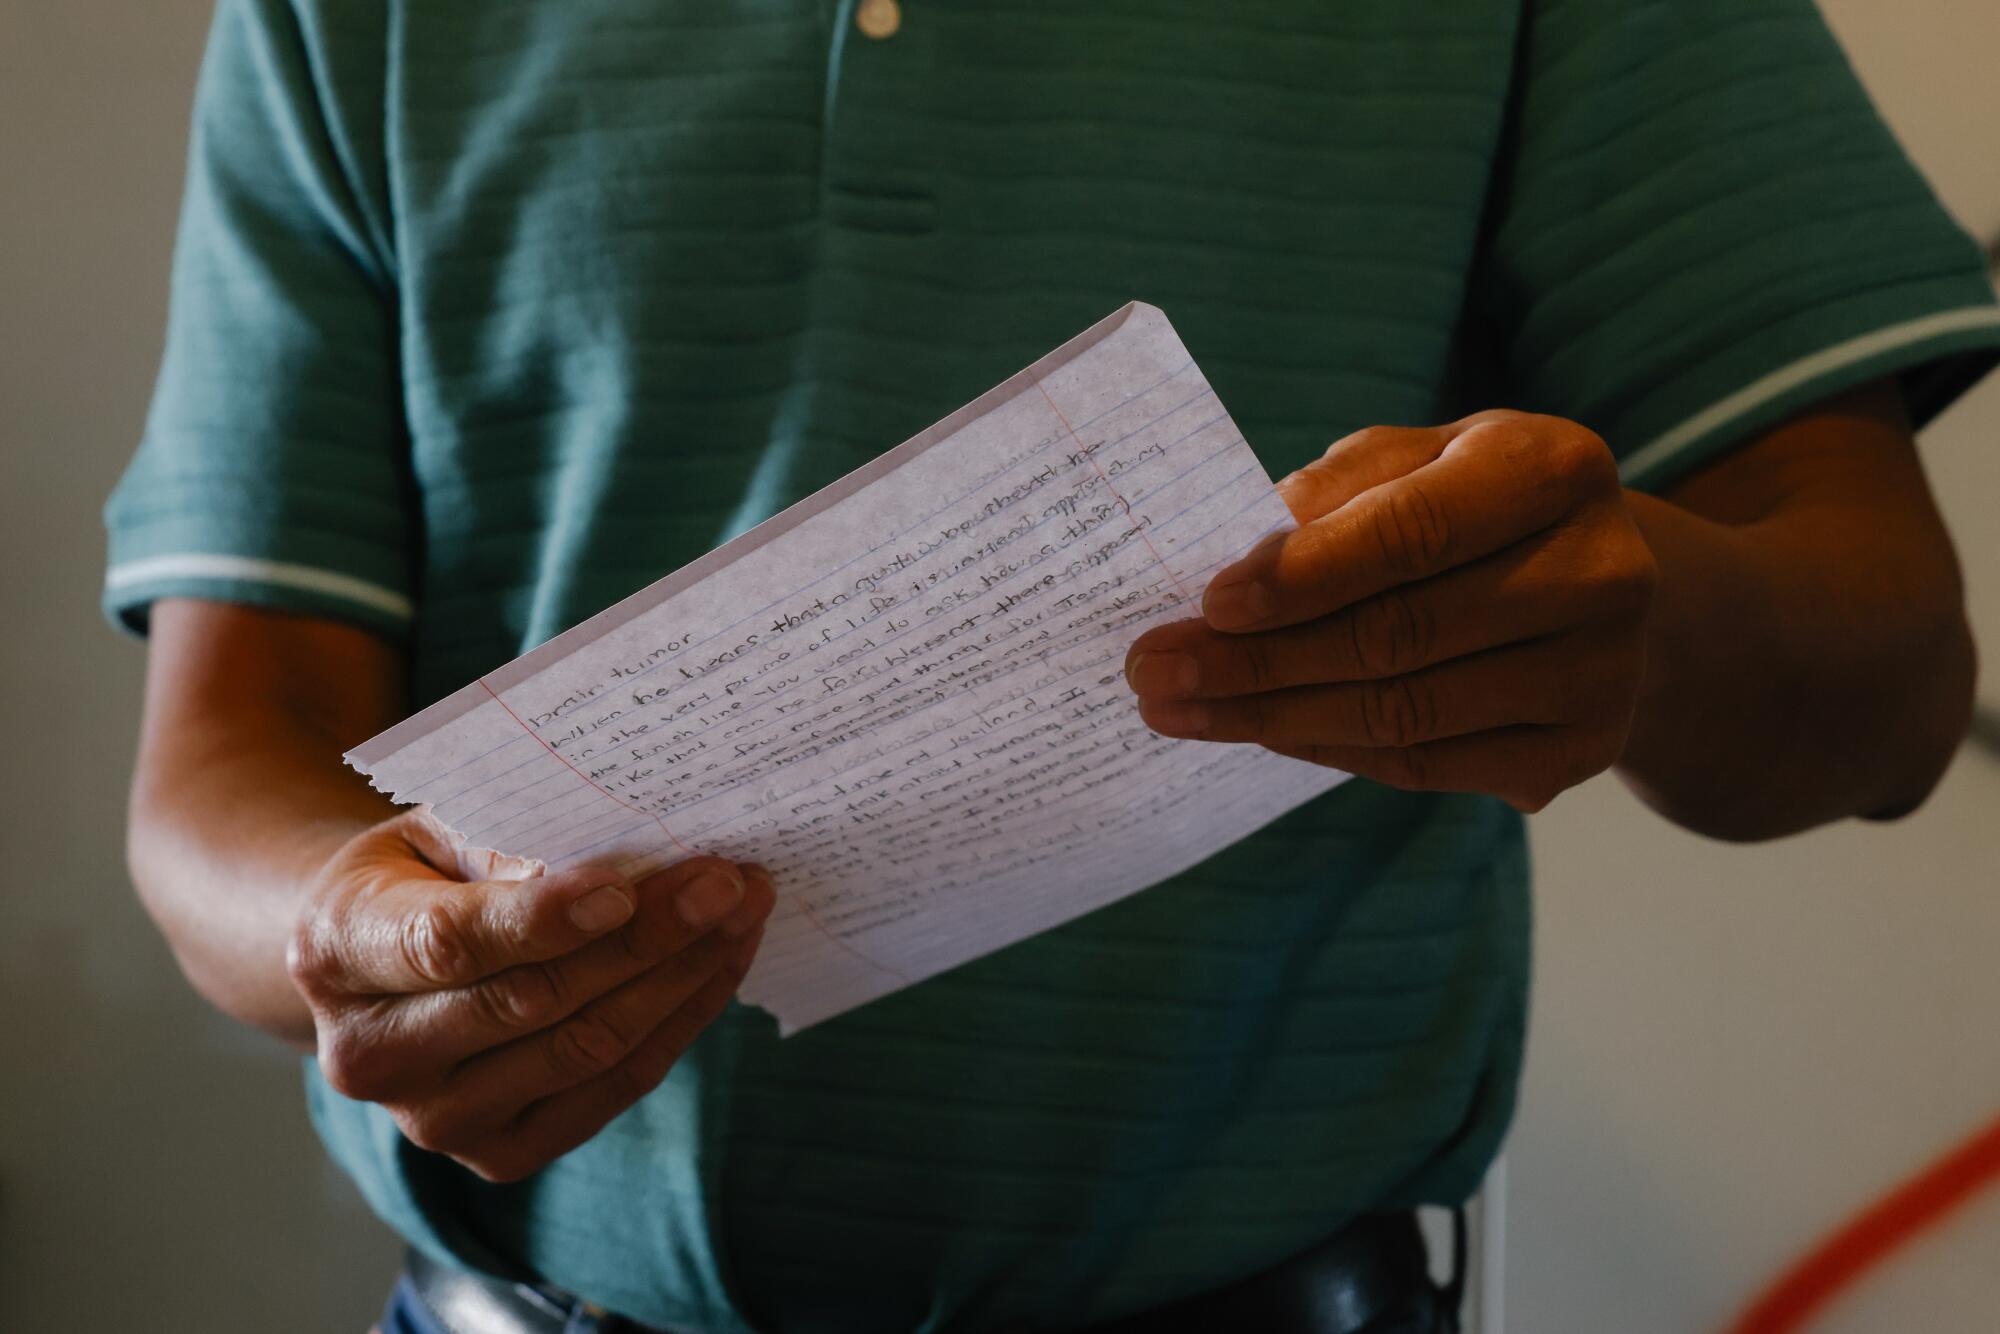 The torso of a person holding a handwritten letter in both hands